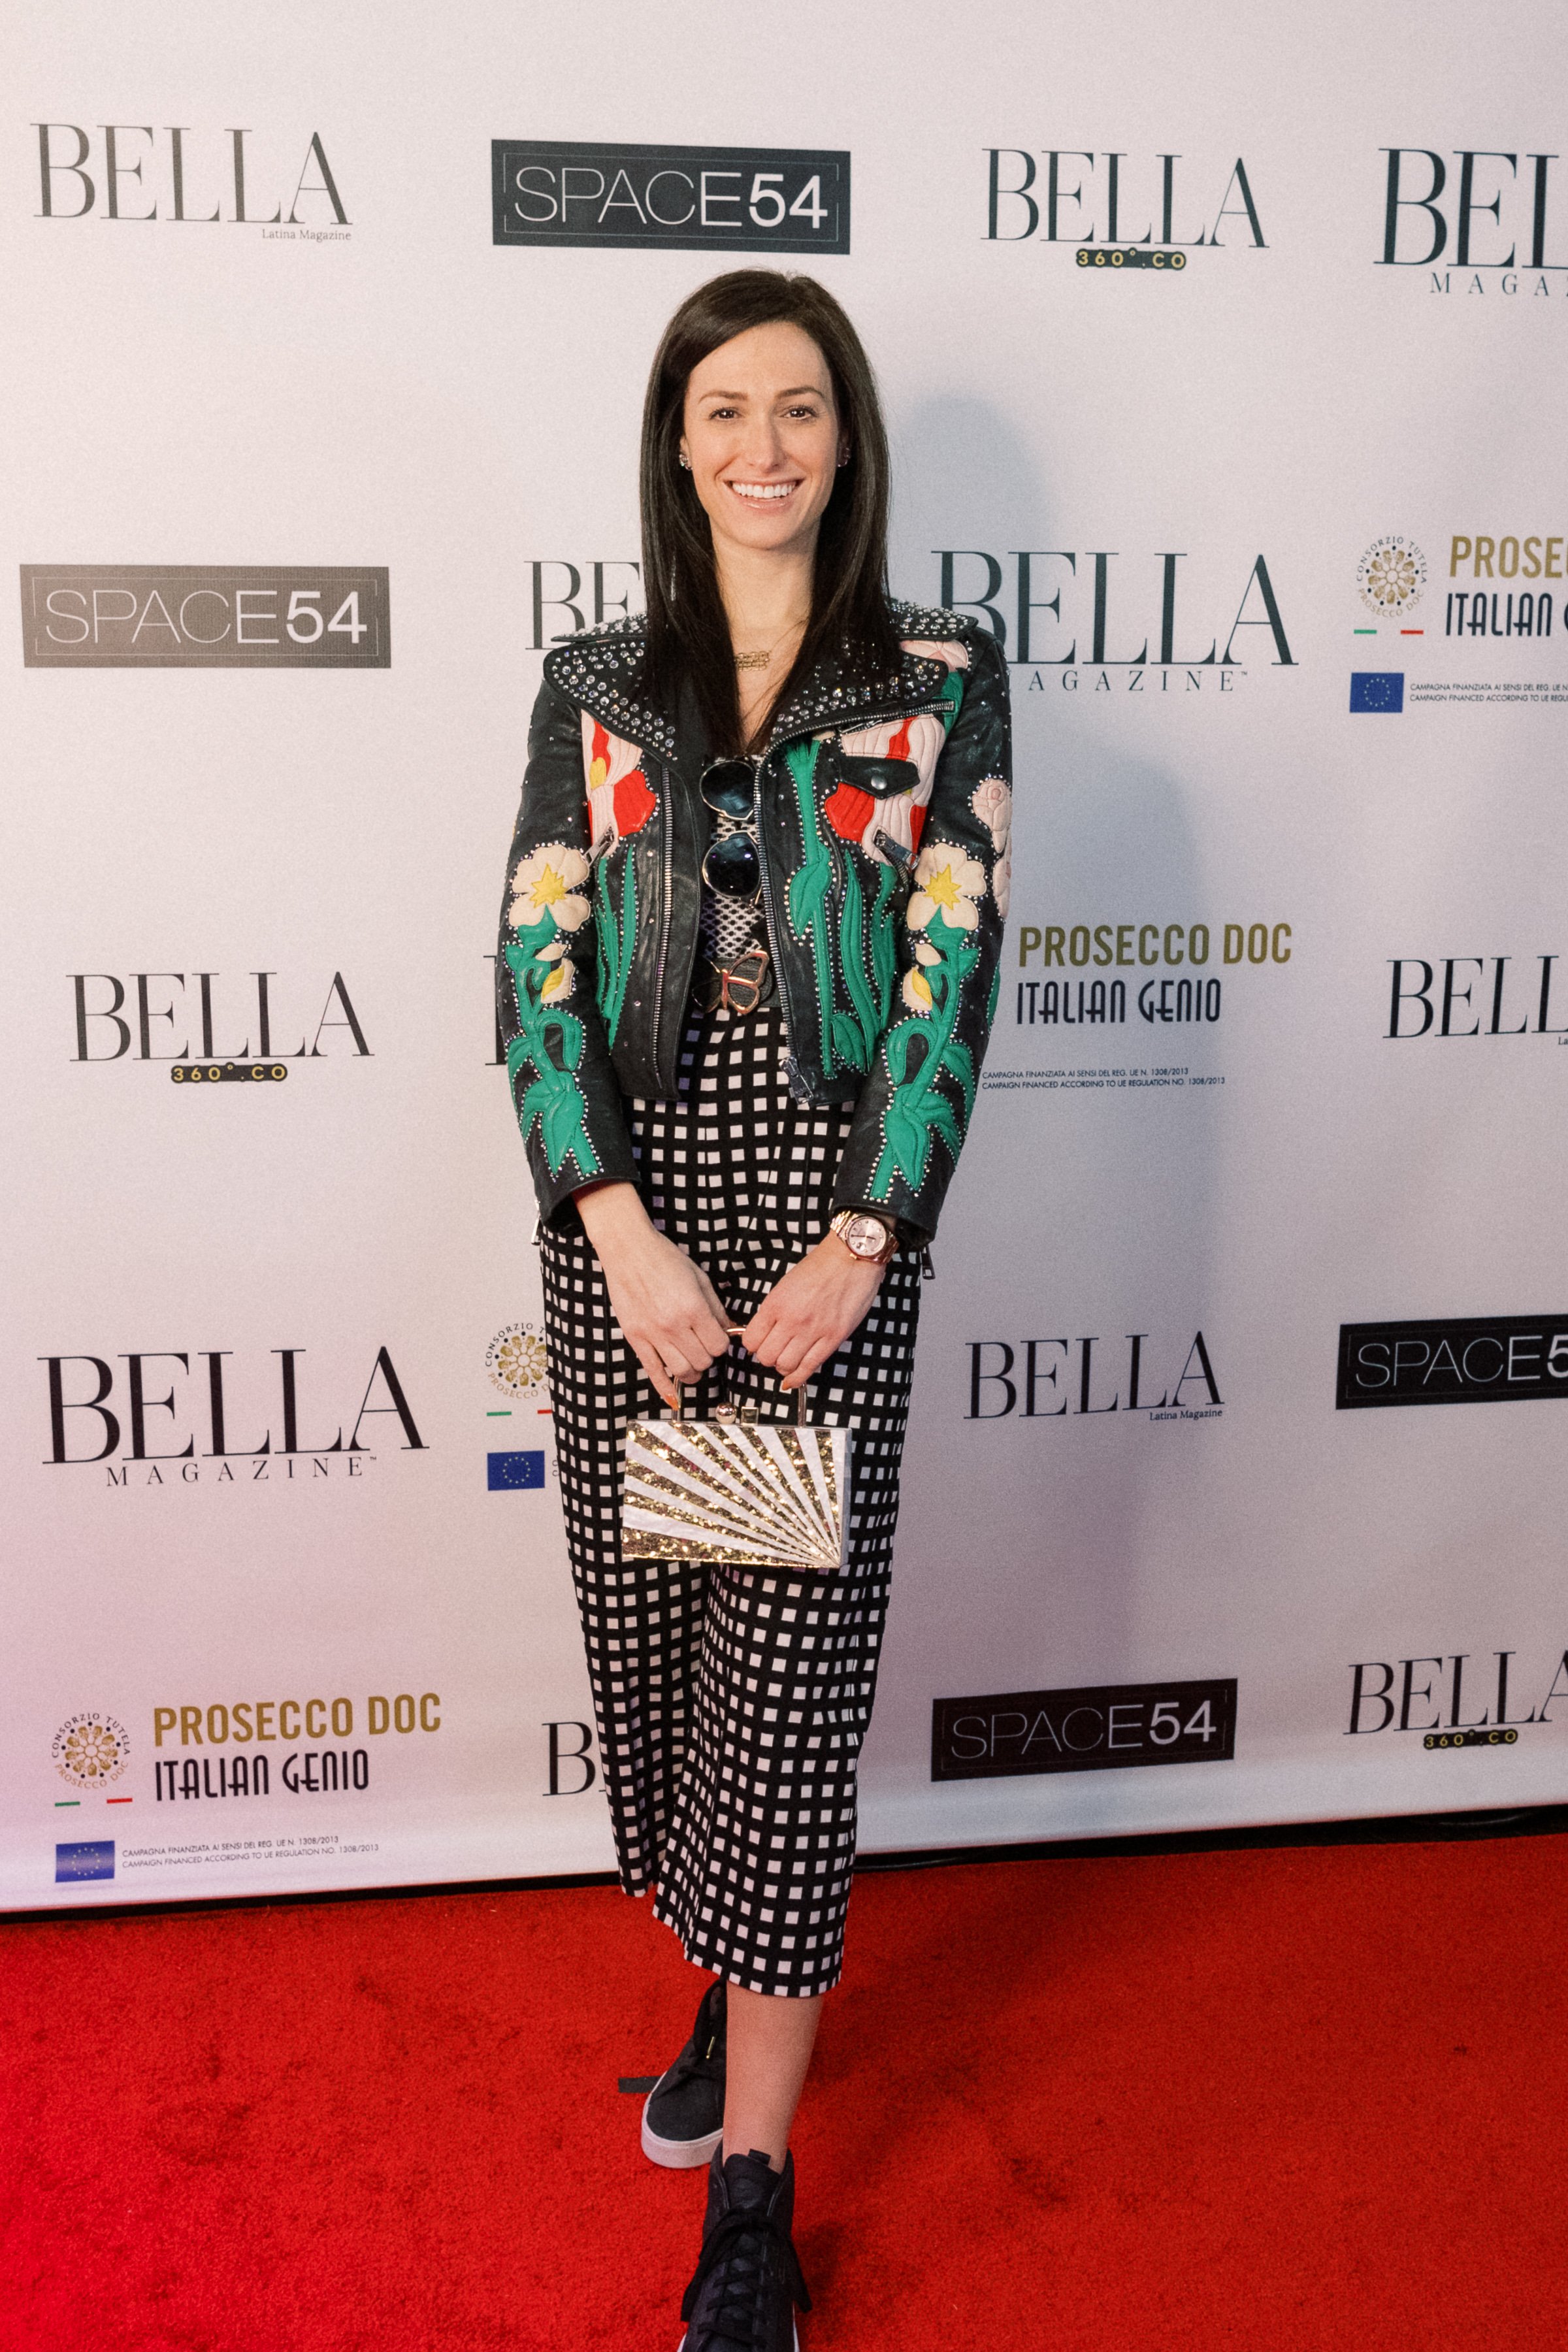 Michelle-Behre-Creative-Co-BELLA-Magazine-Co-Women-of-Influence-Cover-Party-Space54-NYC-11.jpg